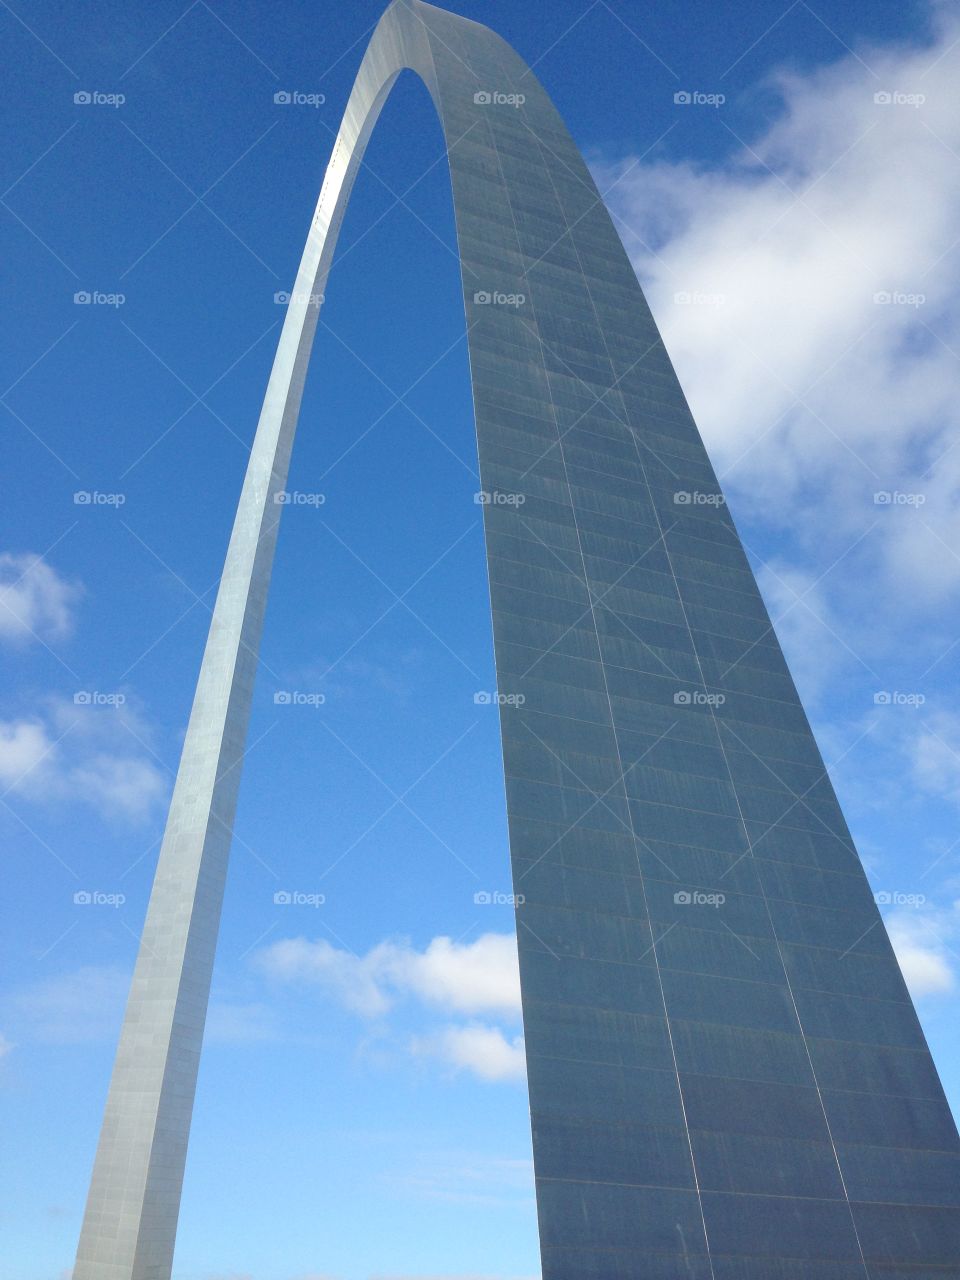 The Arch. The St. Louis Arch